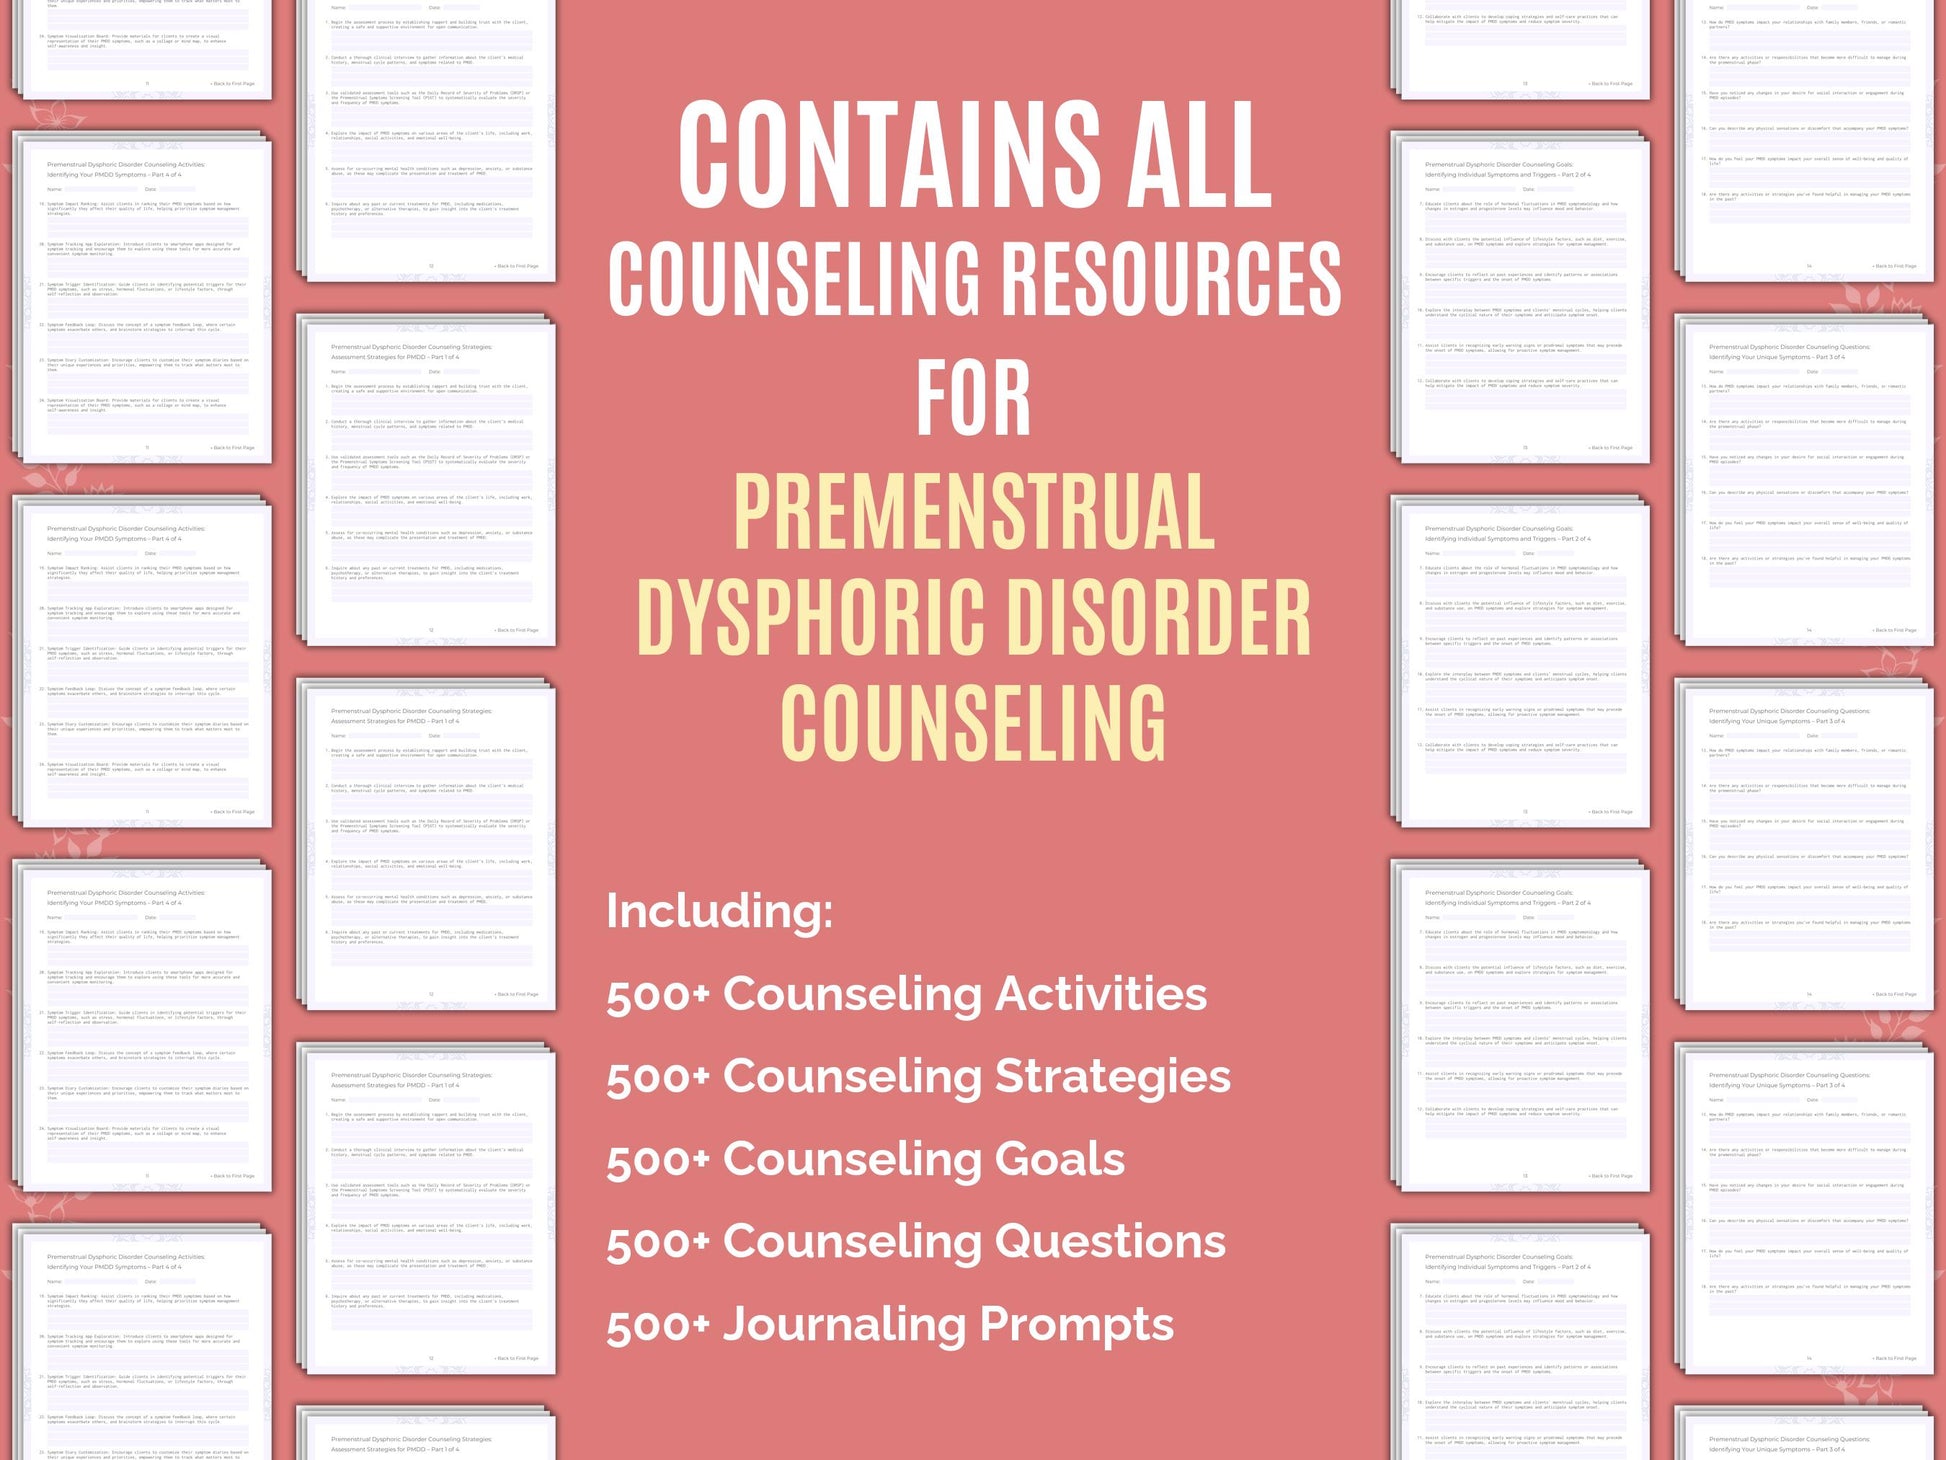 Workbook, Resource, Template, Worksheet, Premenstrual Therapy, Counseling, Dysphoric, Disorder, Mental Health, Premenstrual Bundle, Premenstrual, Counselor, Therapist